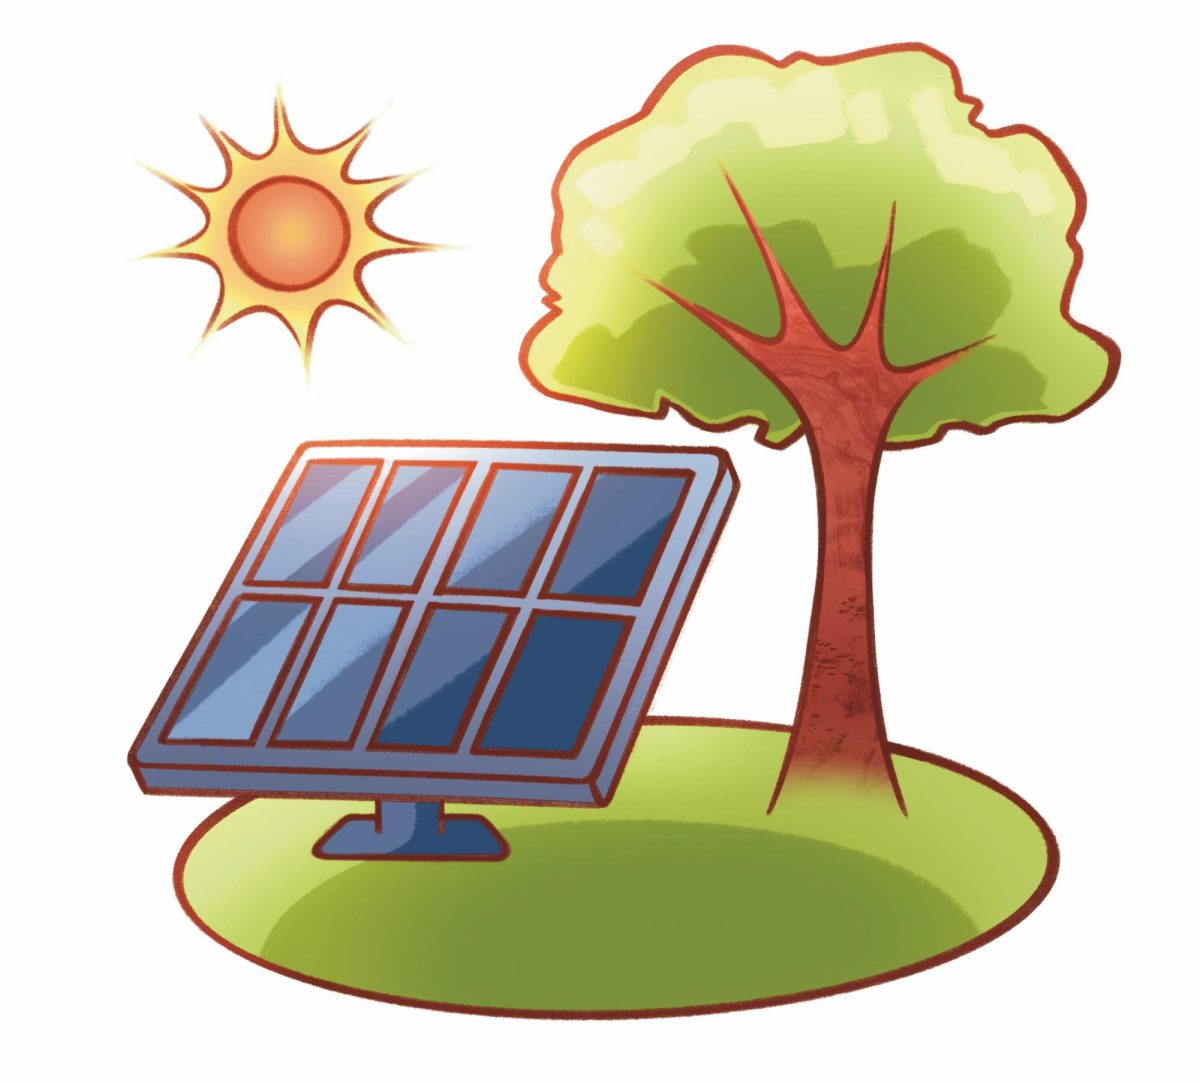 Solar+panel+legislation+increases+price%2C+leads+to+decline+in+users